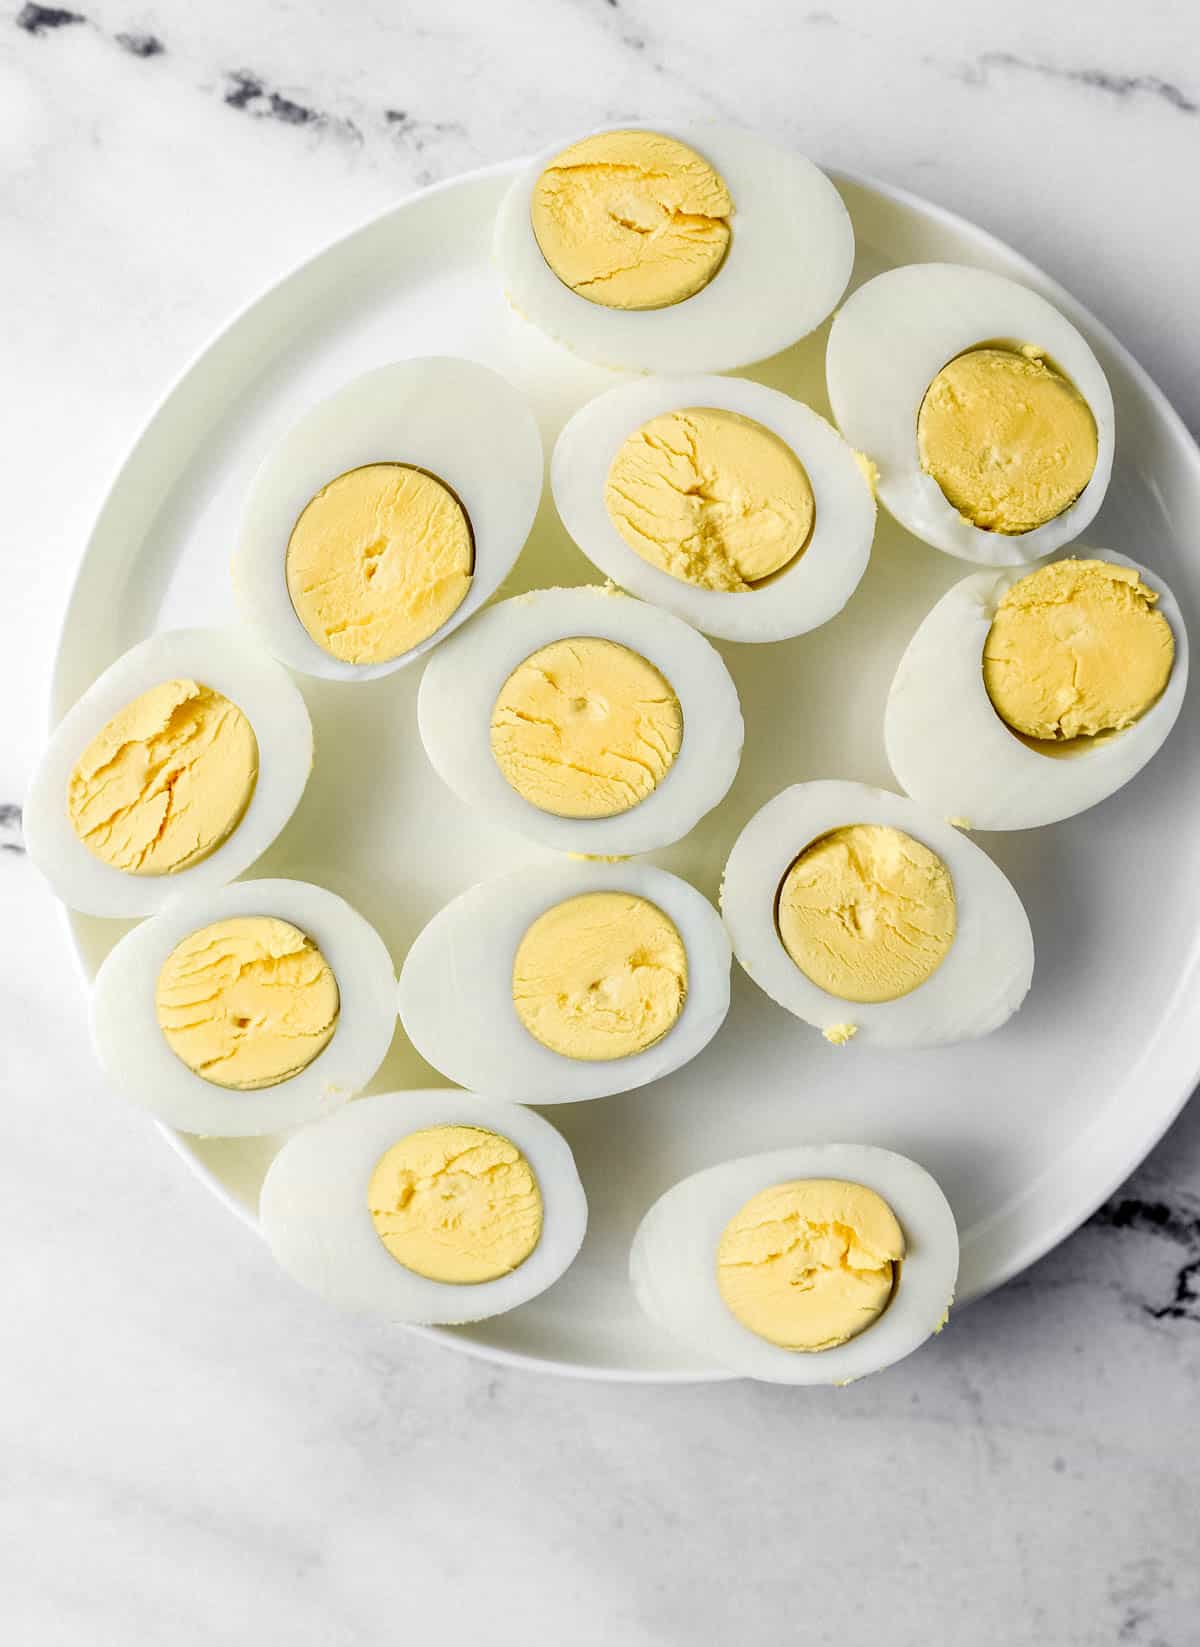 Hard boiled eggs cut in half on white plate. 